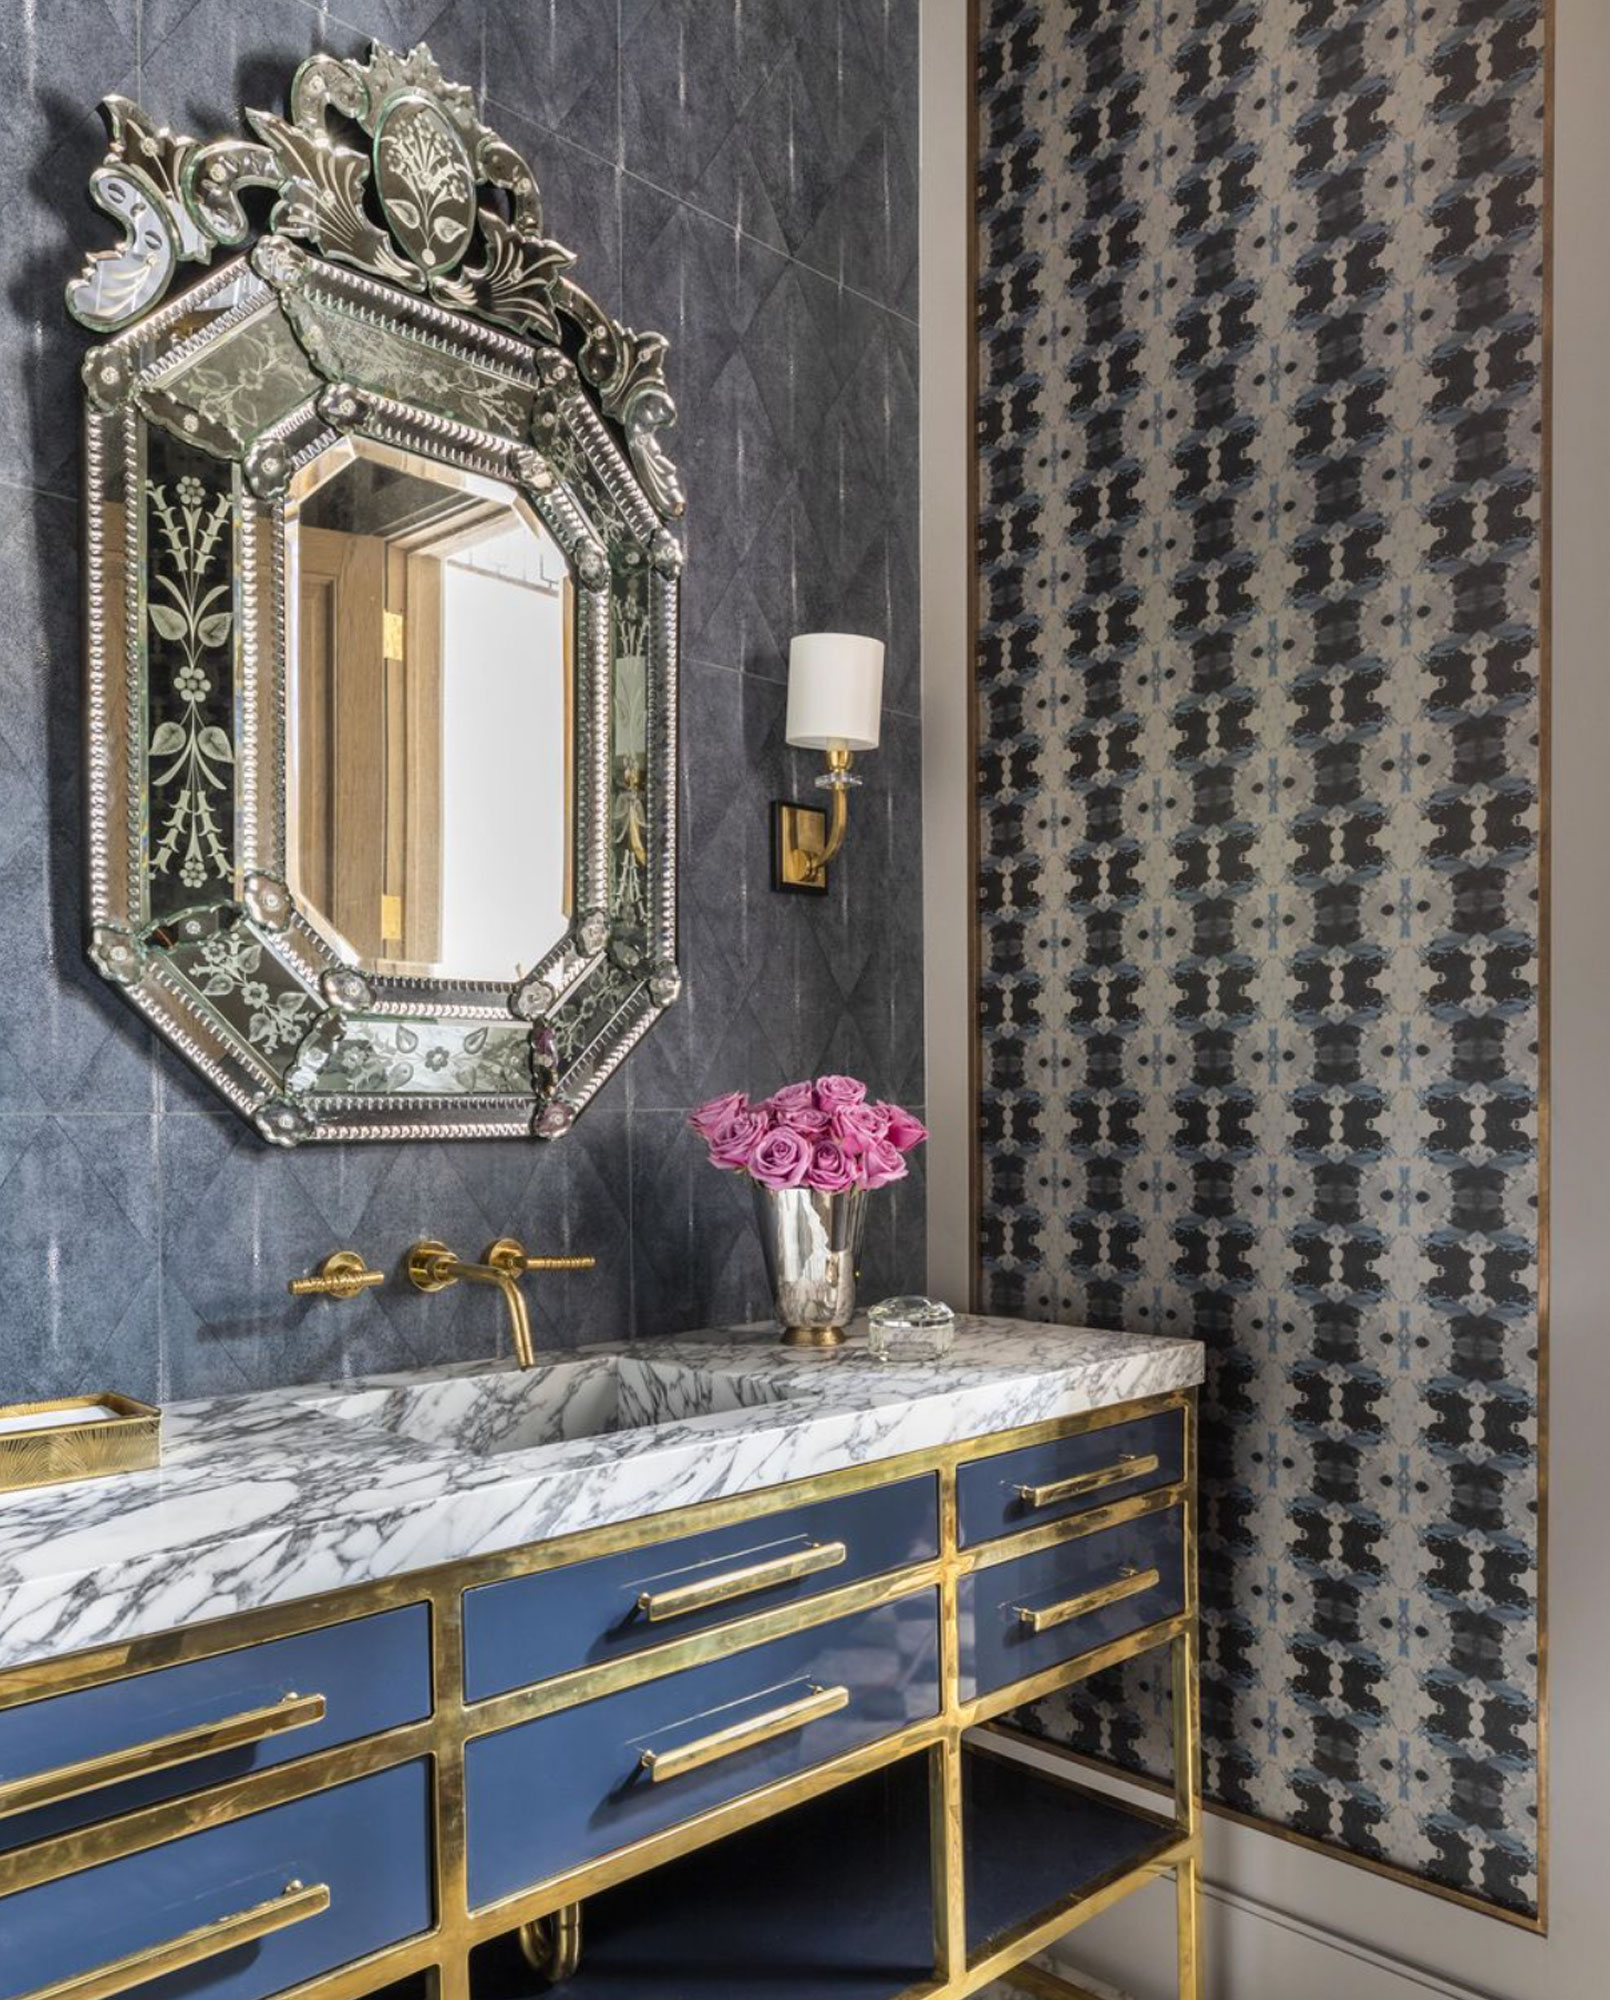 House Beautiful - A Houston Family Home Combines Warm Comfort With a “Modern Edge” - Formal Powder Room